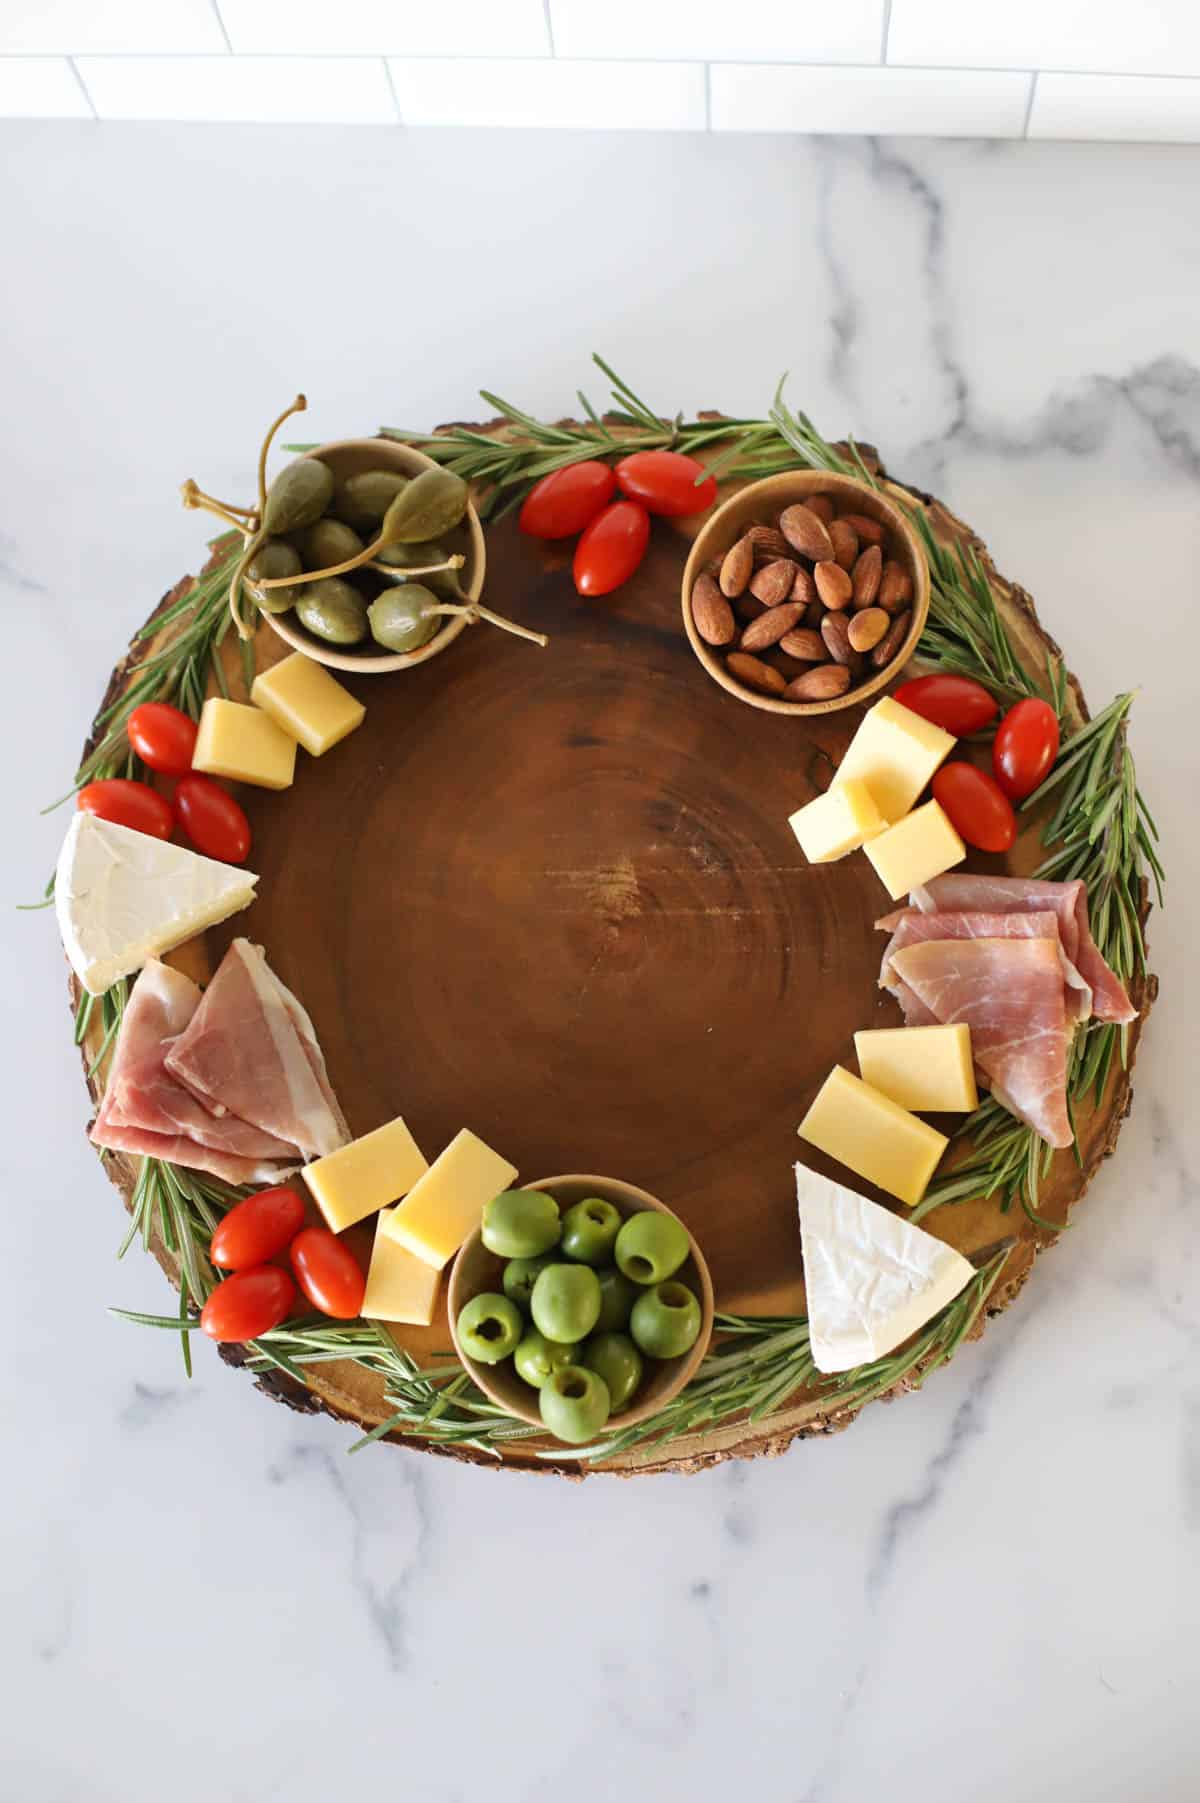 Round board trimmed with rosemary with cherry tomatoes, brie, caperberries, almonds, cheddar cheese and prosciutto.